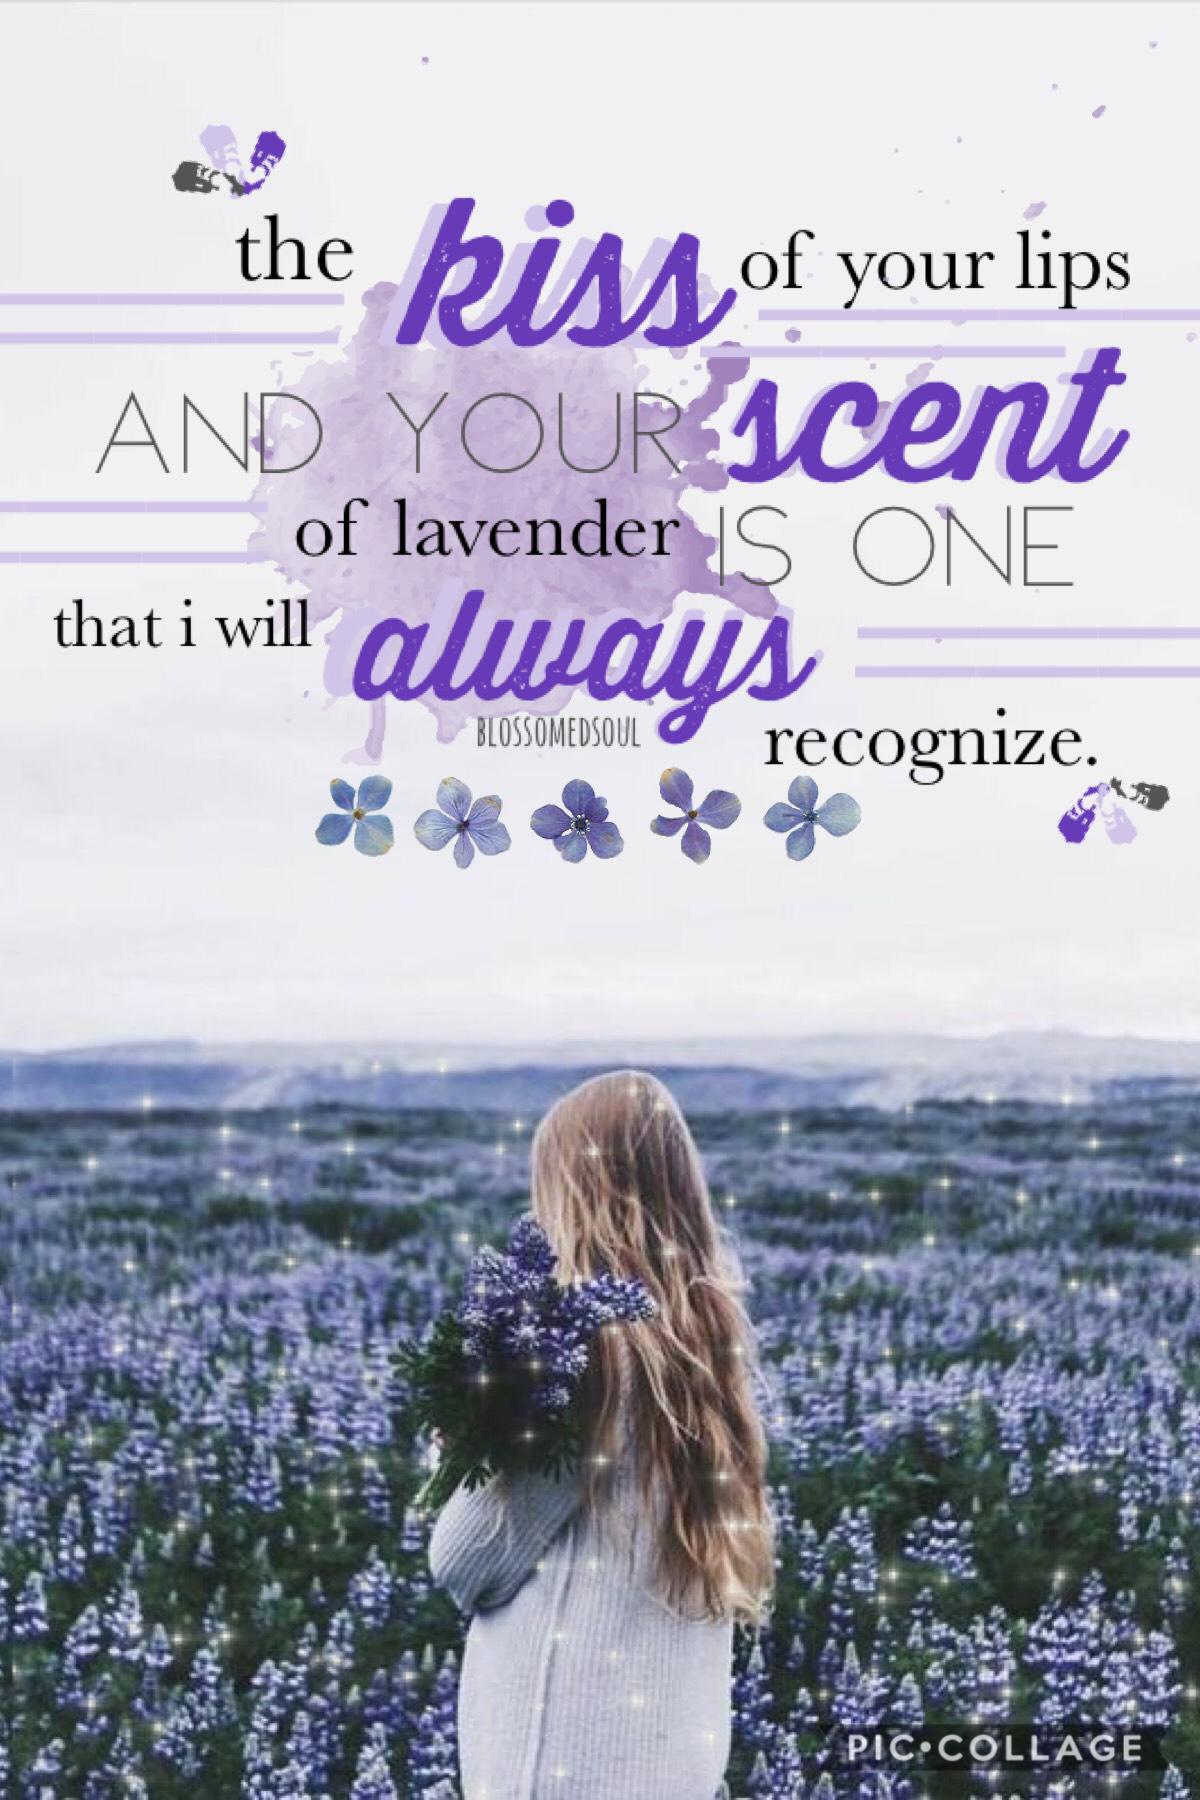 t a p

sorry that i haven’t posted in forever! here’s a quick little collage i worked on 🙃 quote by me! ♥️ qotd: do you like the smell of lavender? aotd: not really, but it’s a pretty flower 🌿